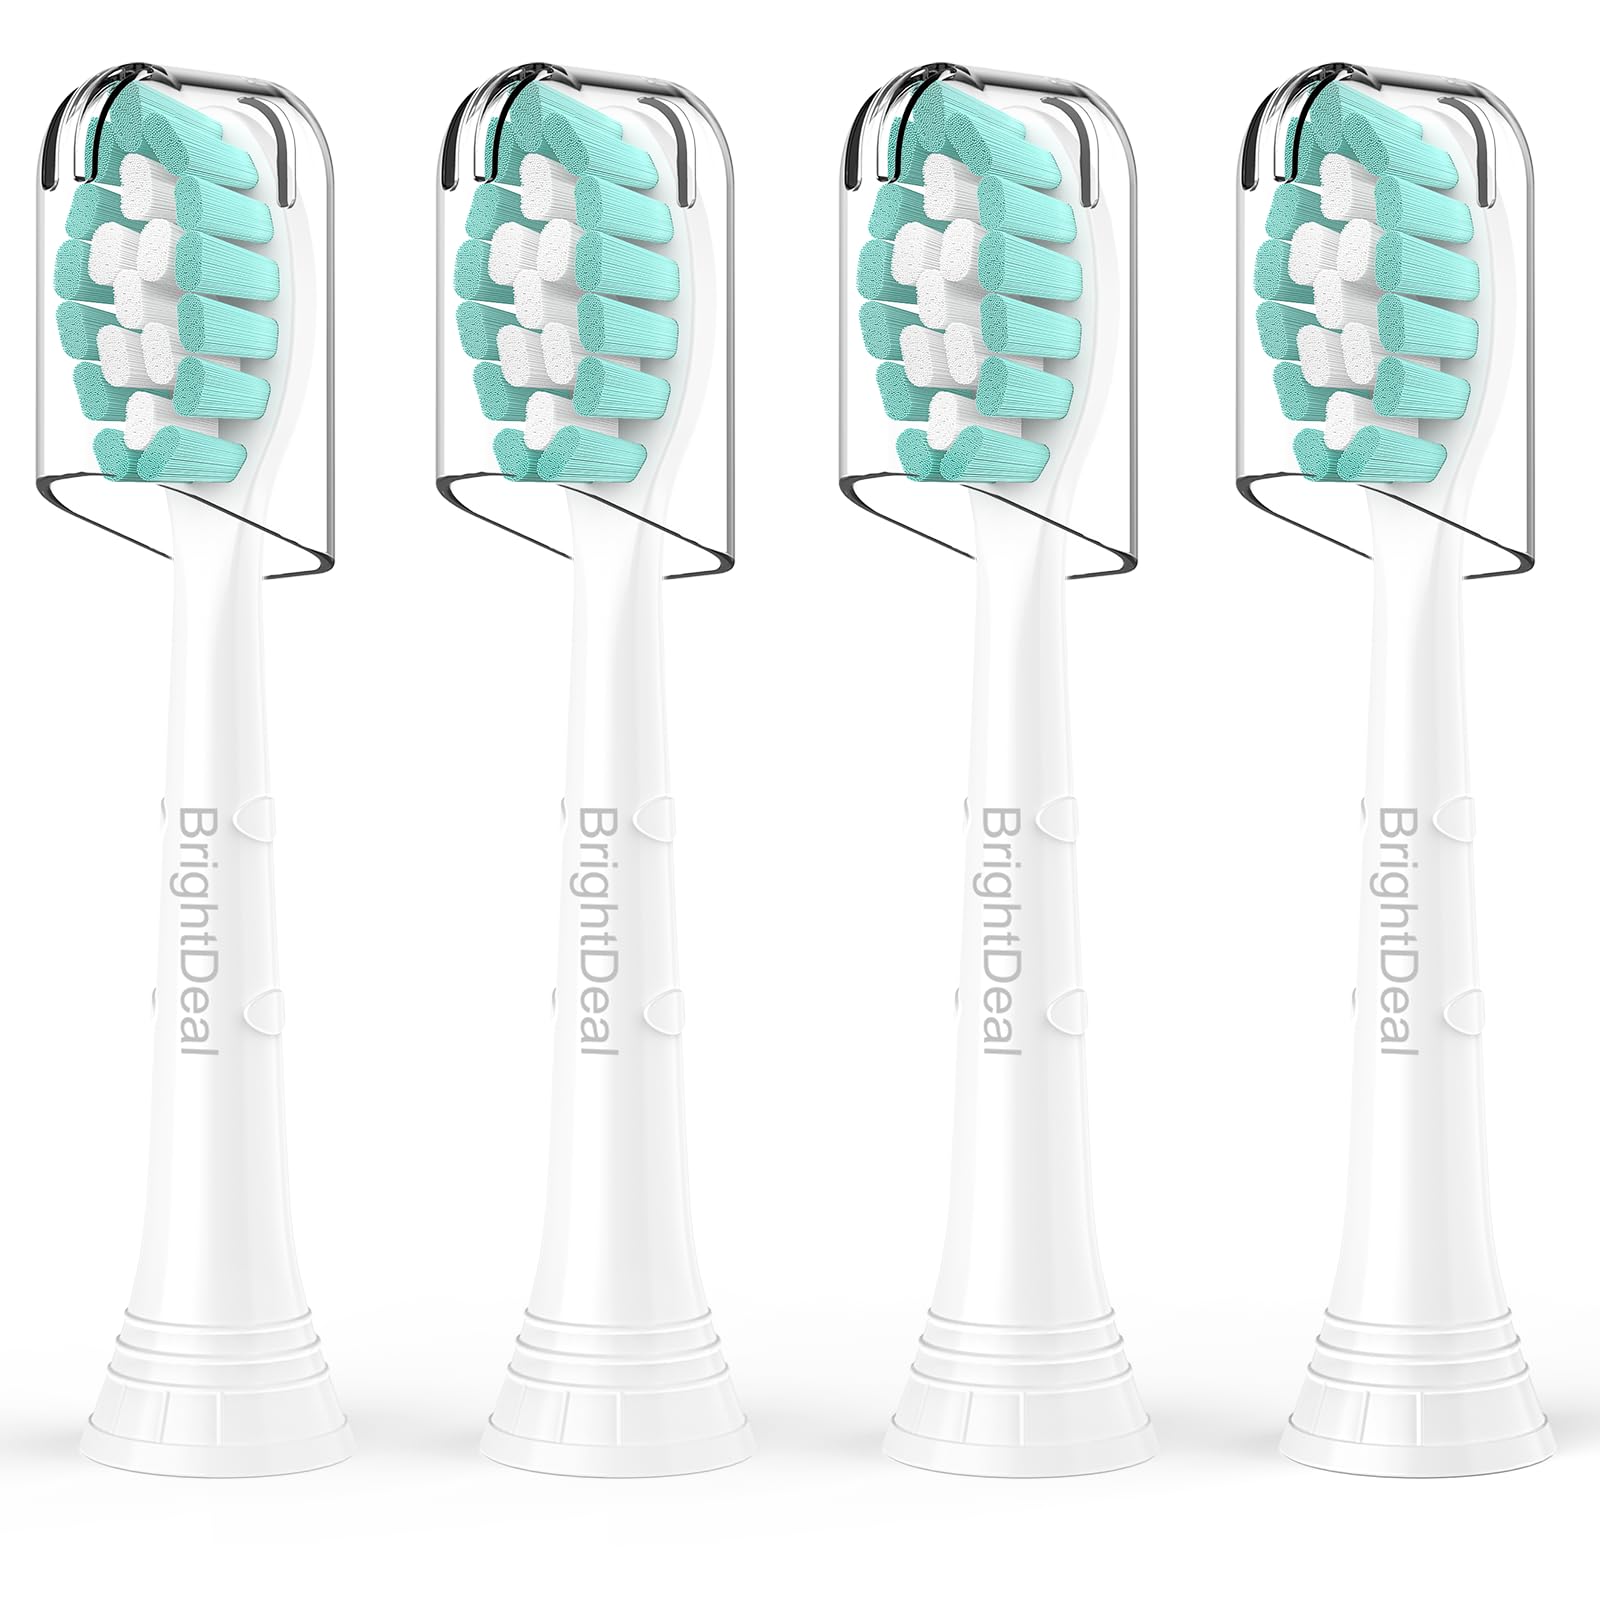 BrightDeal Toothbrush Heads for Philips Sonicare DiamondClean DailyClean EasyClean HealthyWhite ExpertClean W C1 C2 G2 C3 G3 W3 Sonic Electric Replacement Brush 1100 4100 5100 6100 White, 4 Pack